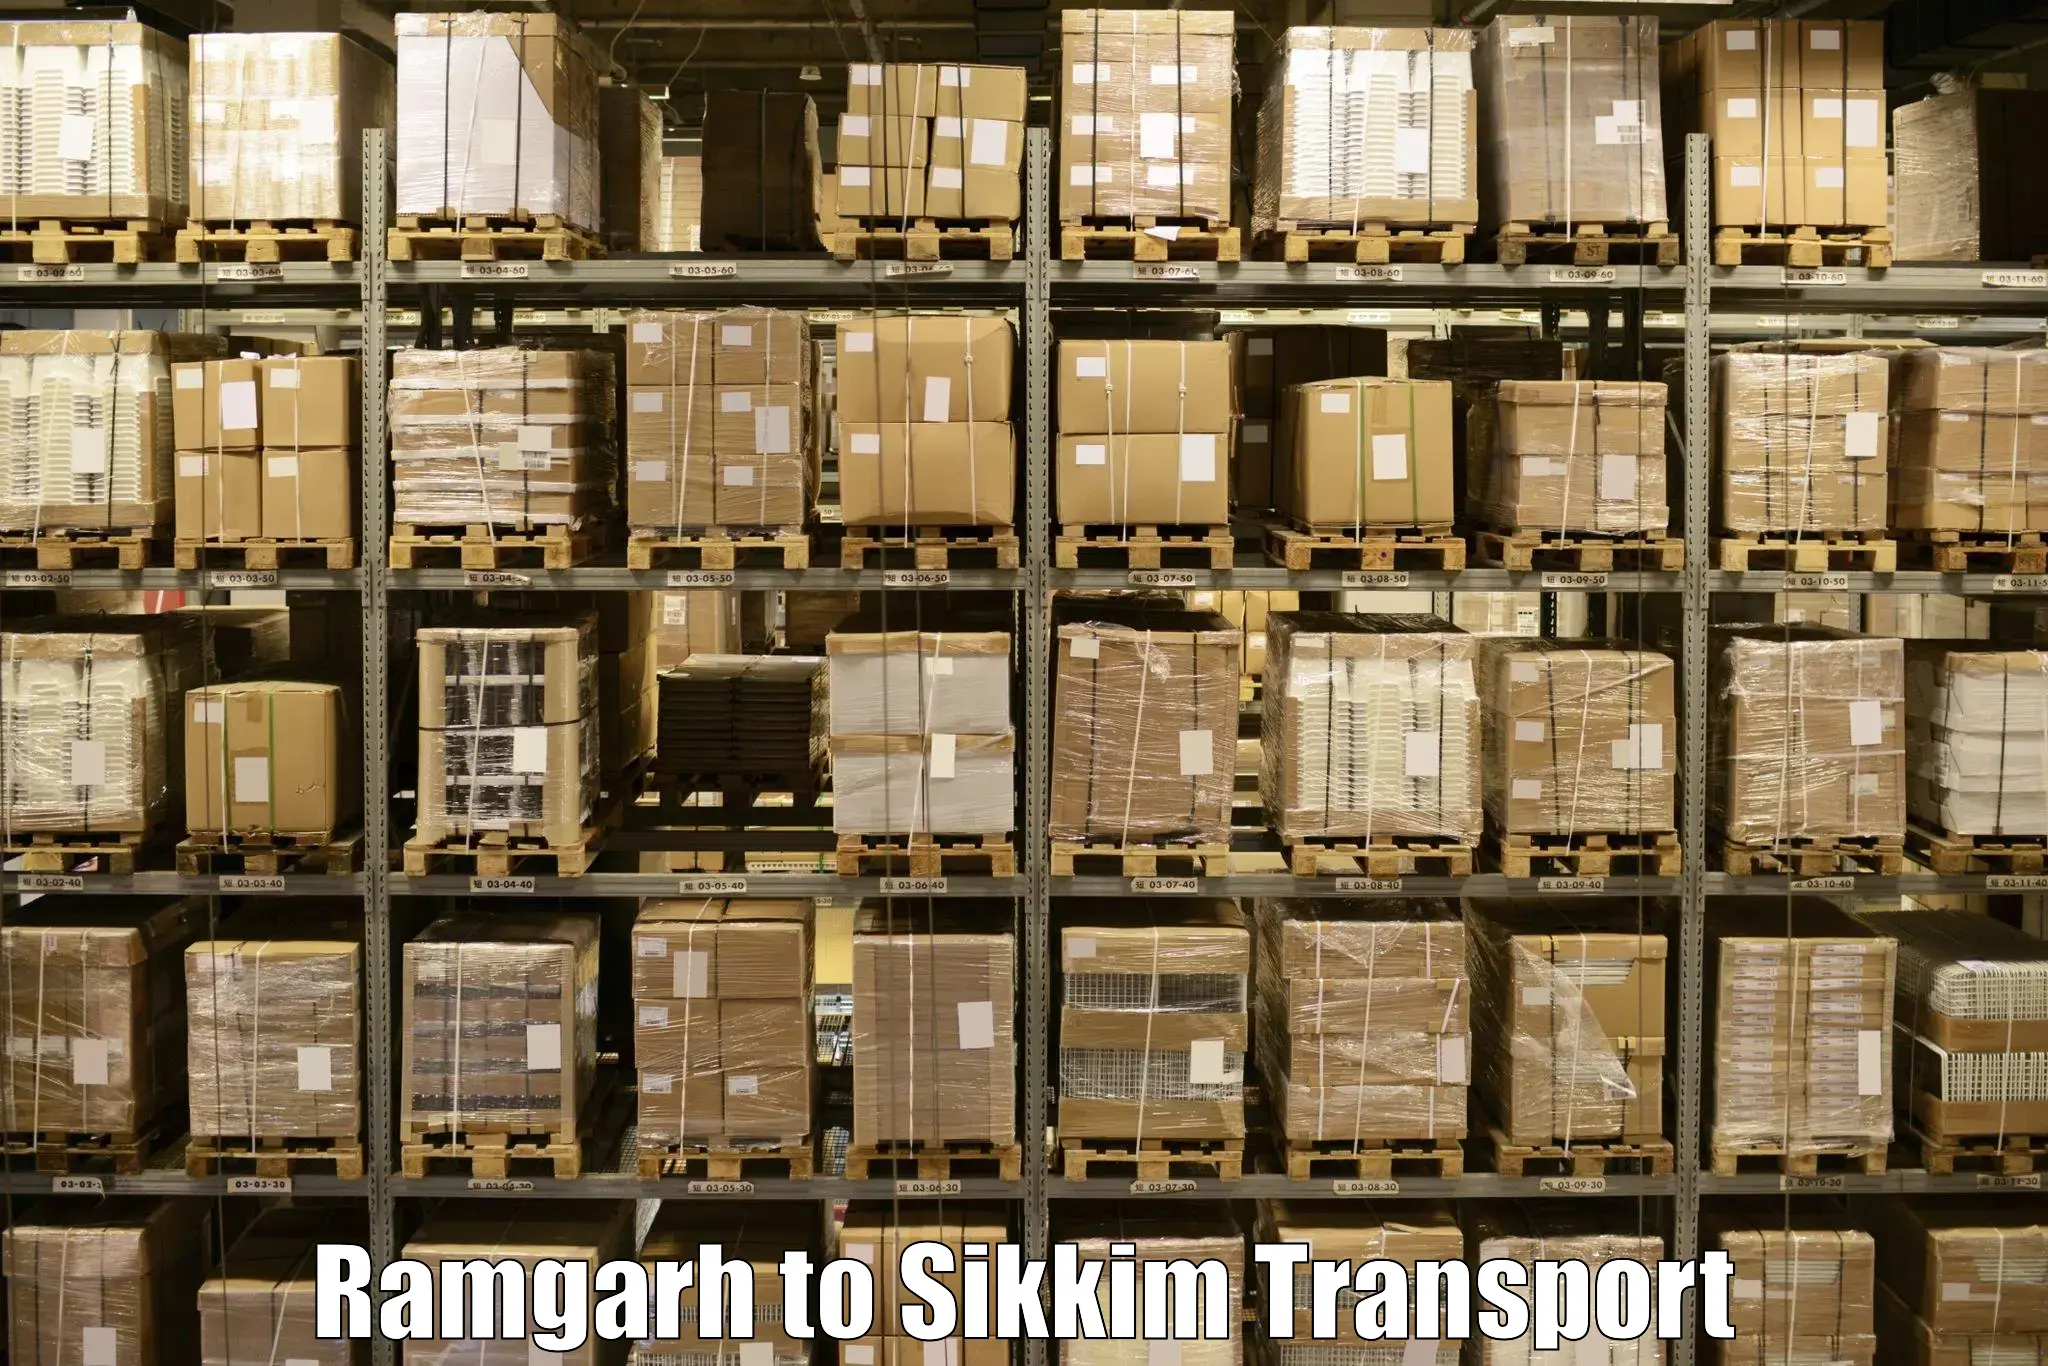 Daily transport service Ramgarh to Sikkim